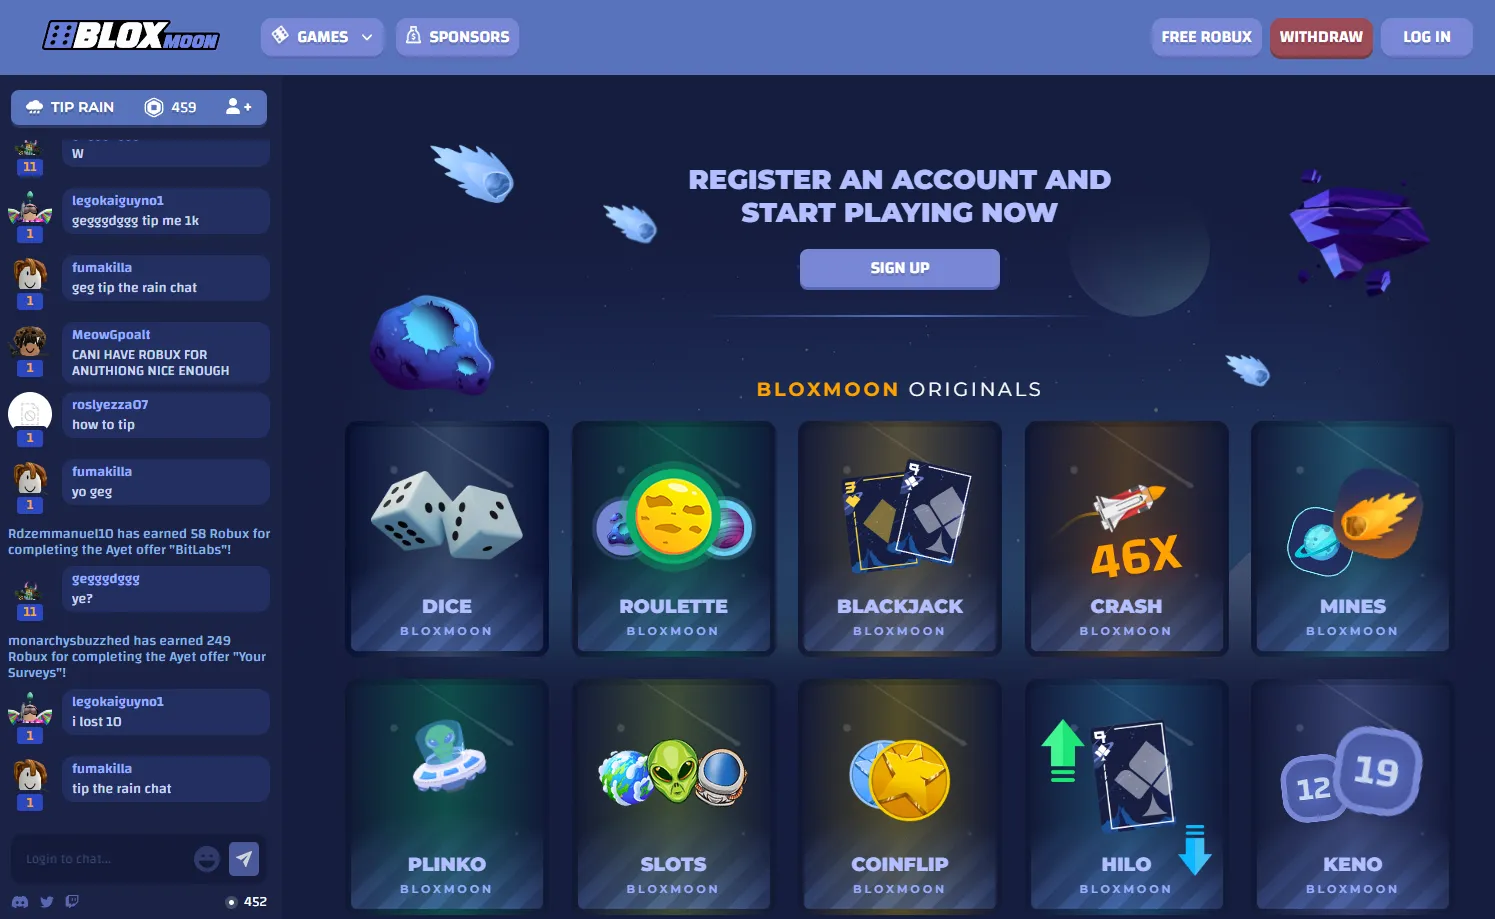 Screenshot showing Bloxmoon.com's website homepage, offering dice, roulette, blackjack, and other forms of gambling.